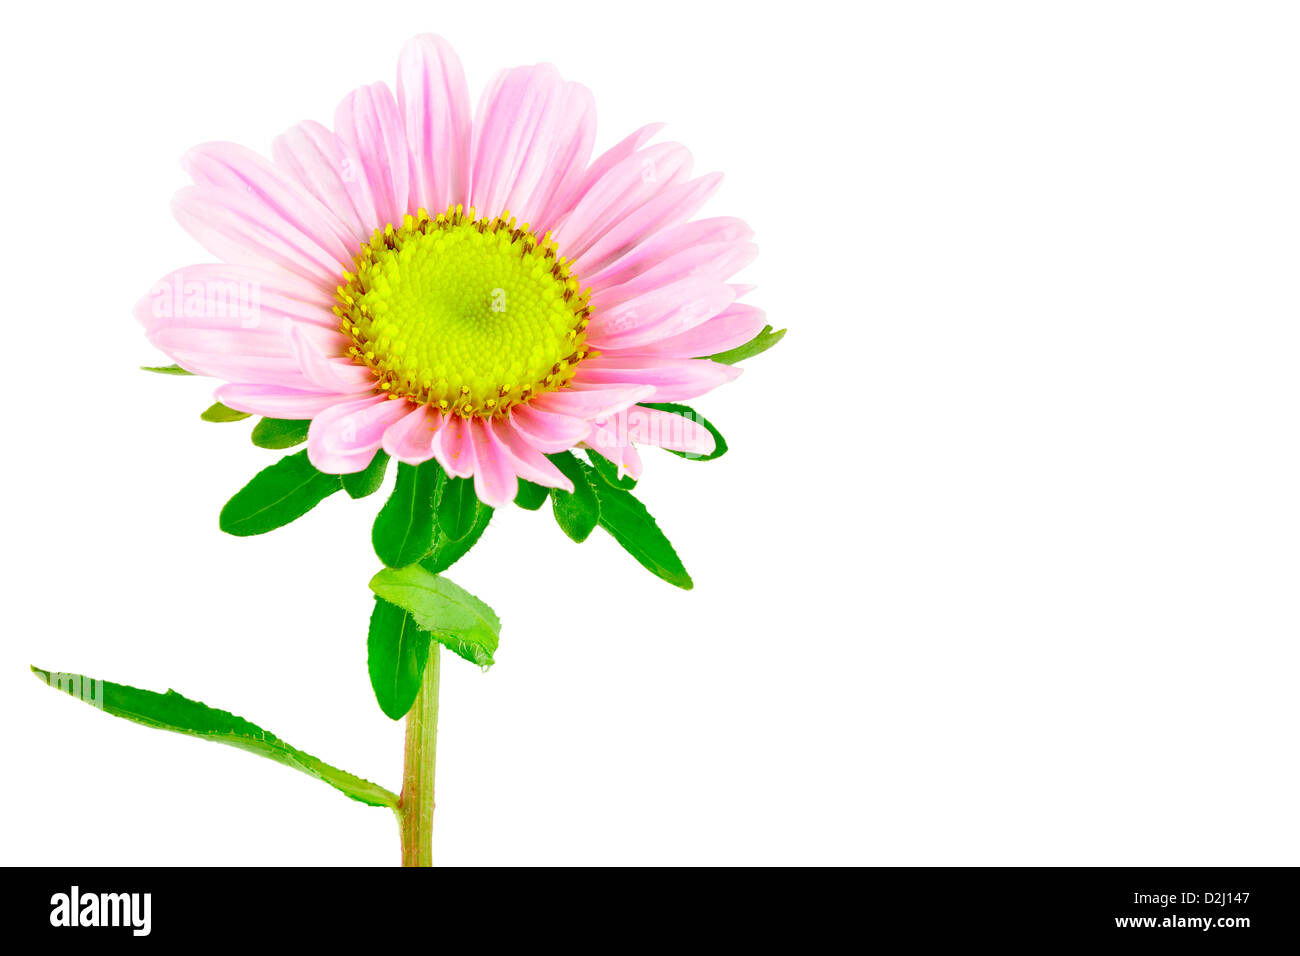 Pink flower Aster. Inflorescence of Aster. Sweet pea. Isolated on white. Isolated with clipping path. Adobe RGB Stock Photo